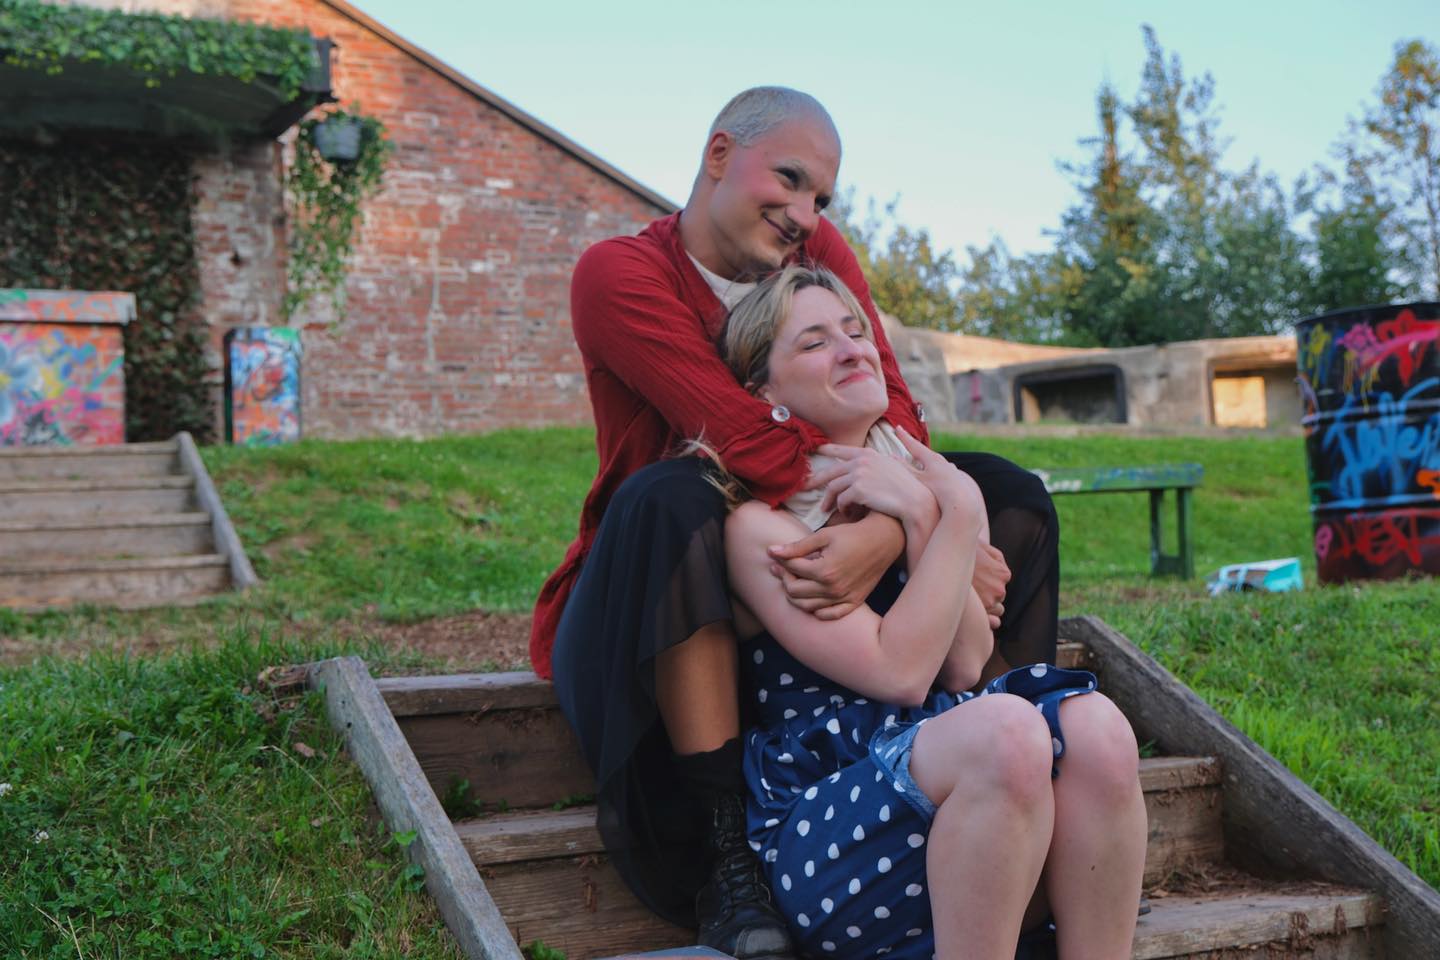 The Cambridge Battery on a beautiful clear day. In the Centre of the Image, Zach who plays The Nurse and Jade who plays Juliet sit together in a loving embrace. The Nurse is sweetly hugging Juliet. Both people look beautiful and perfectly content.